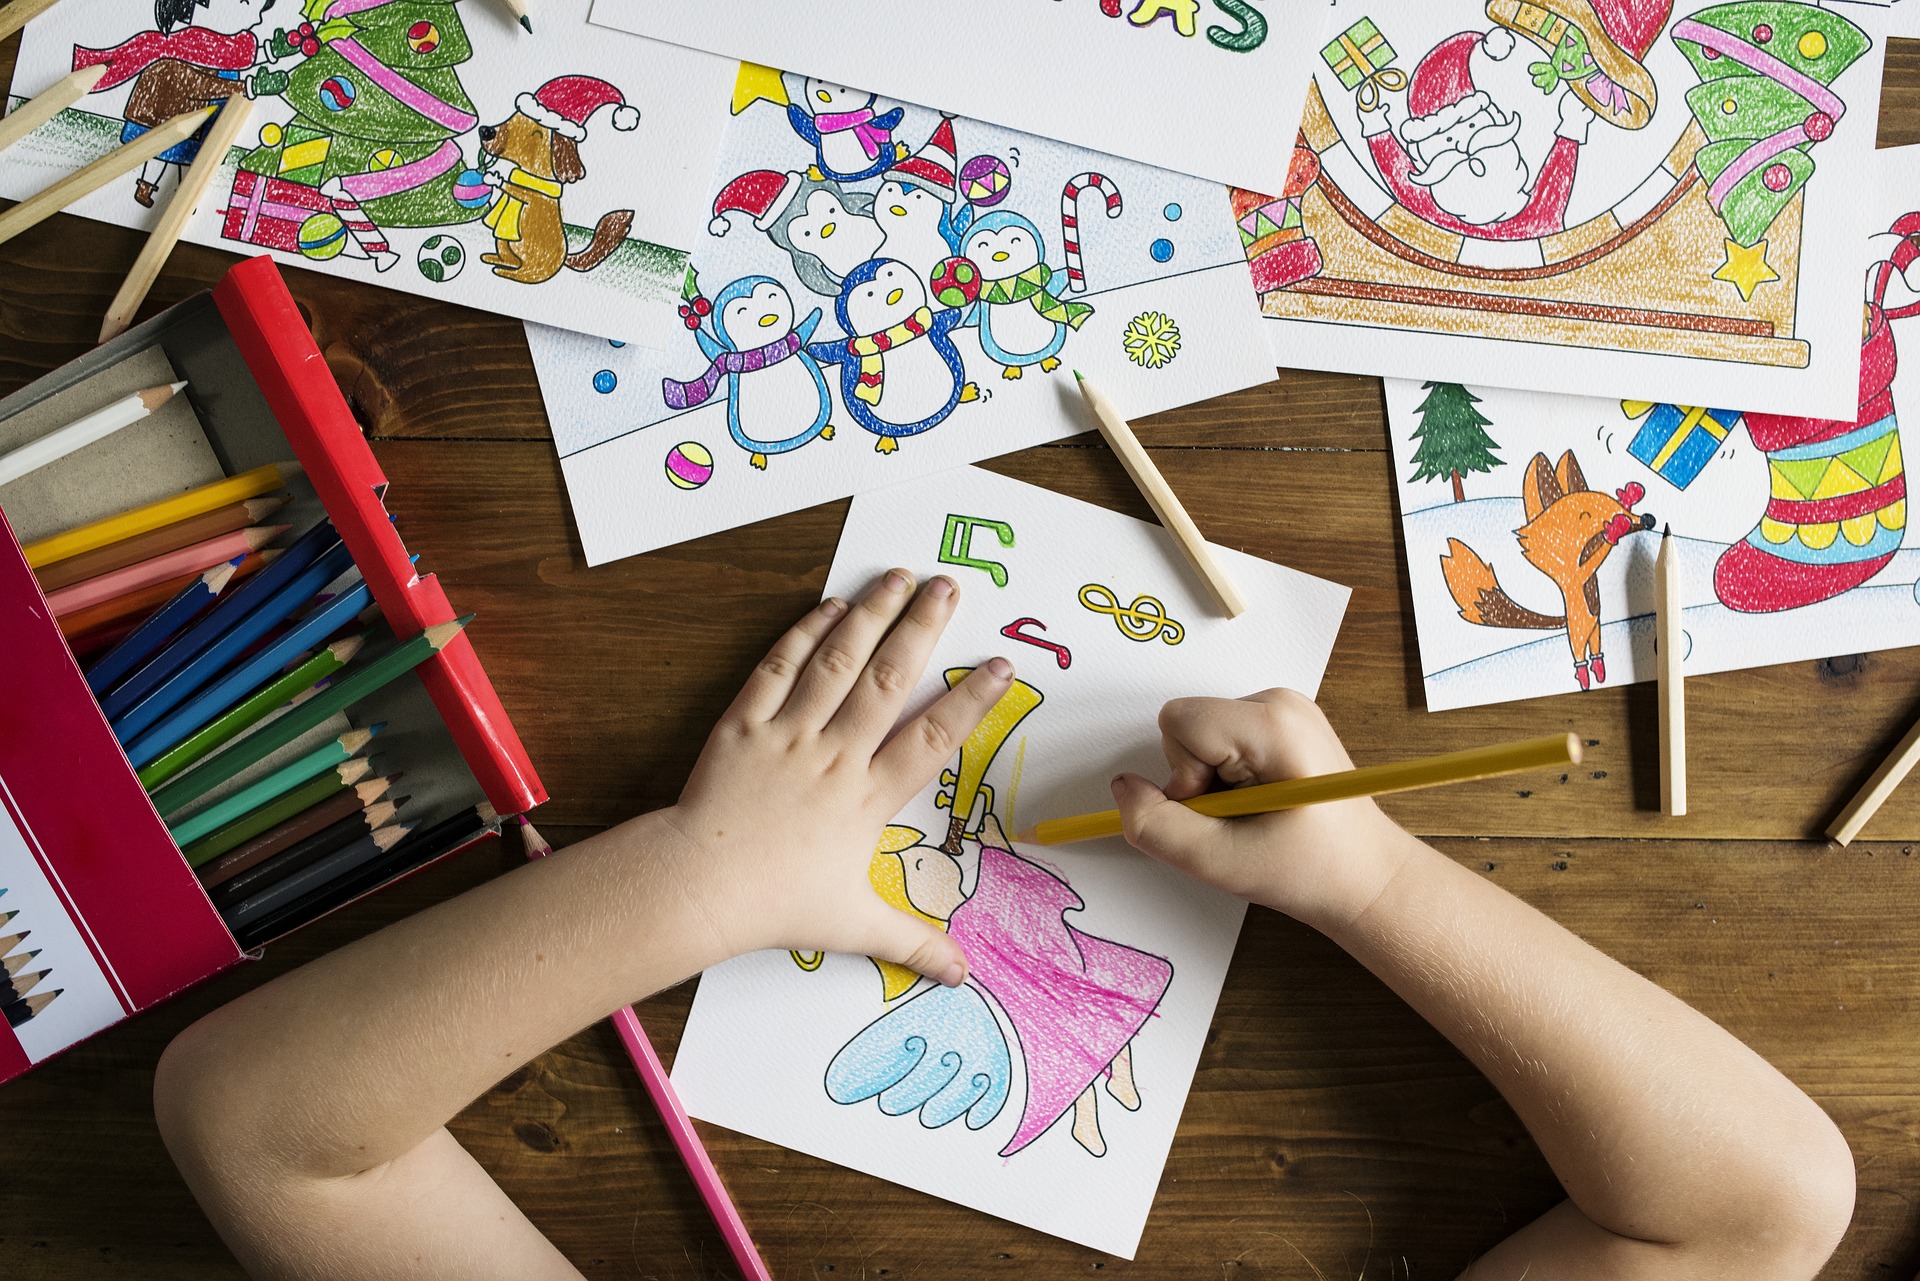 5 Life Skills Learned from Art Class for Children